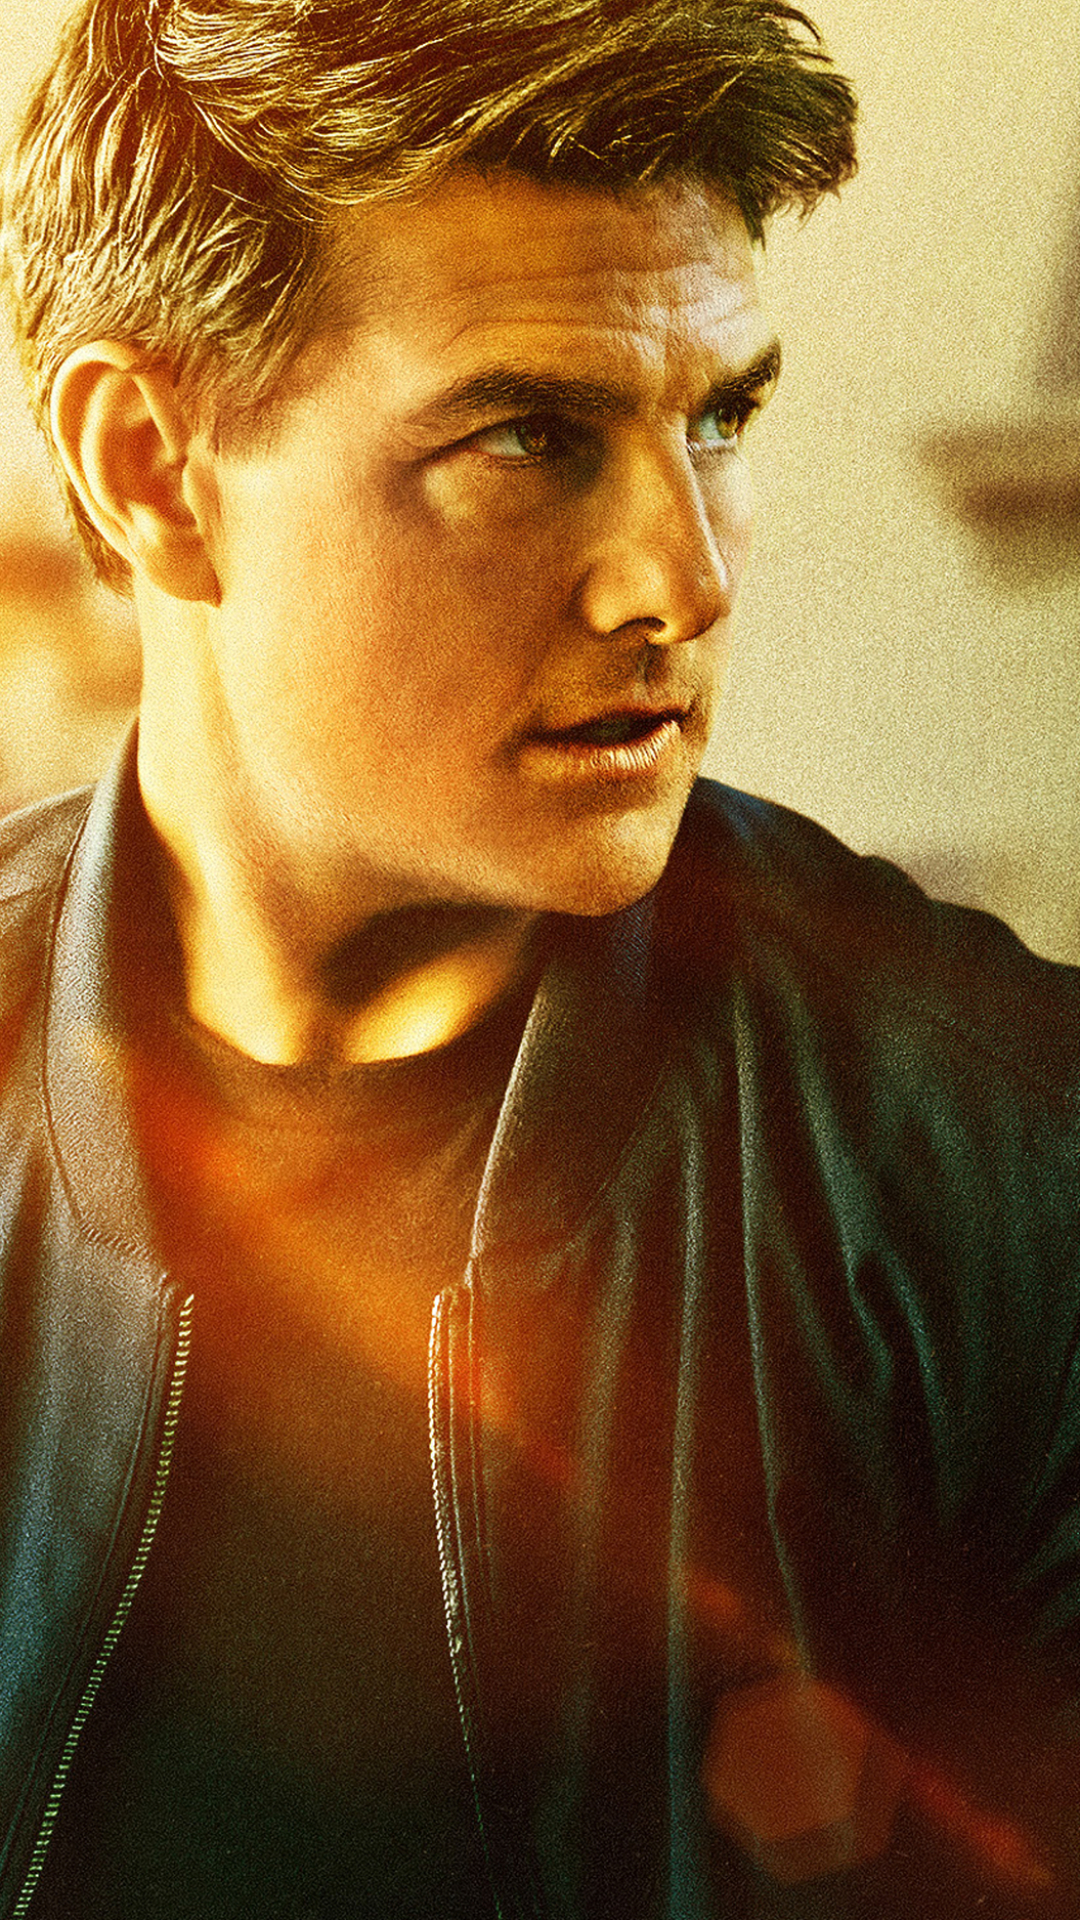 movie, mission: impossible fallout, tom cruise, ethan hunt, mission: impossible